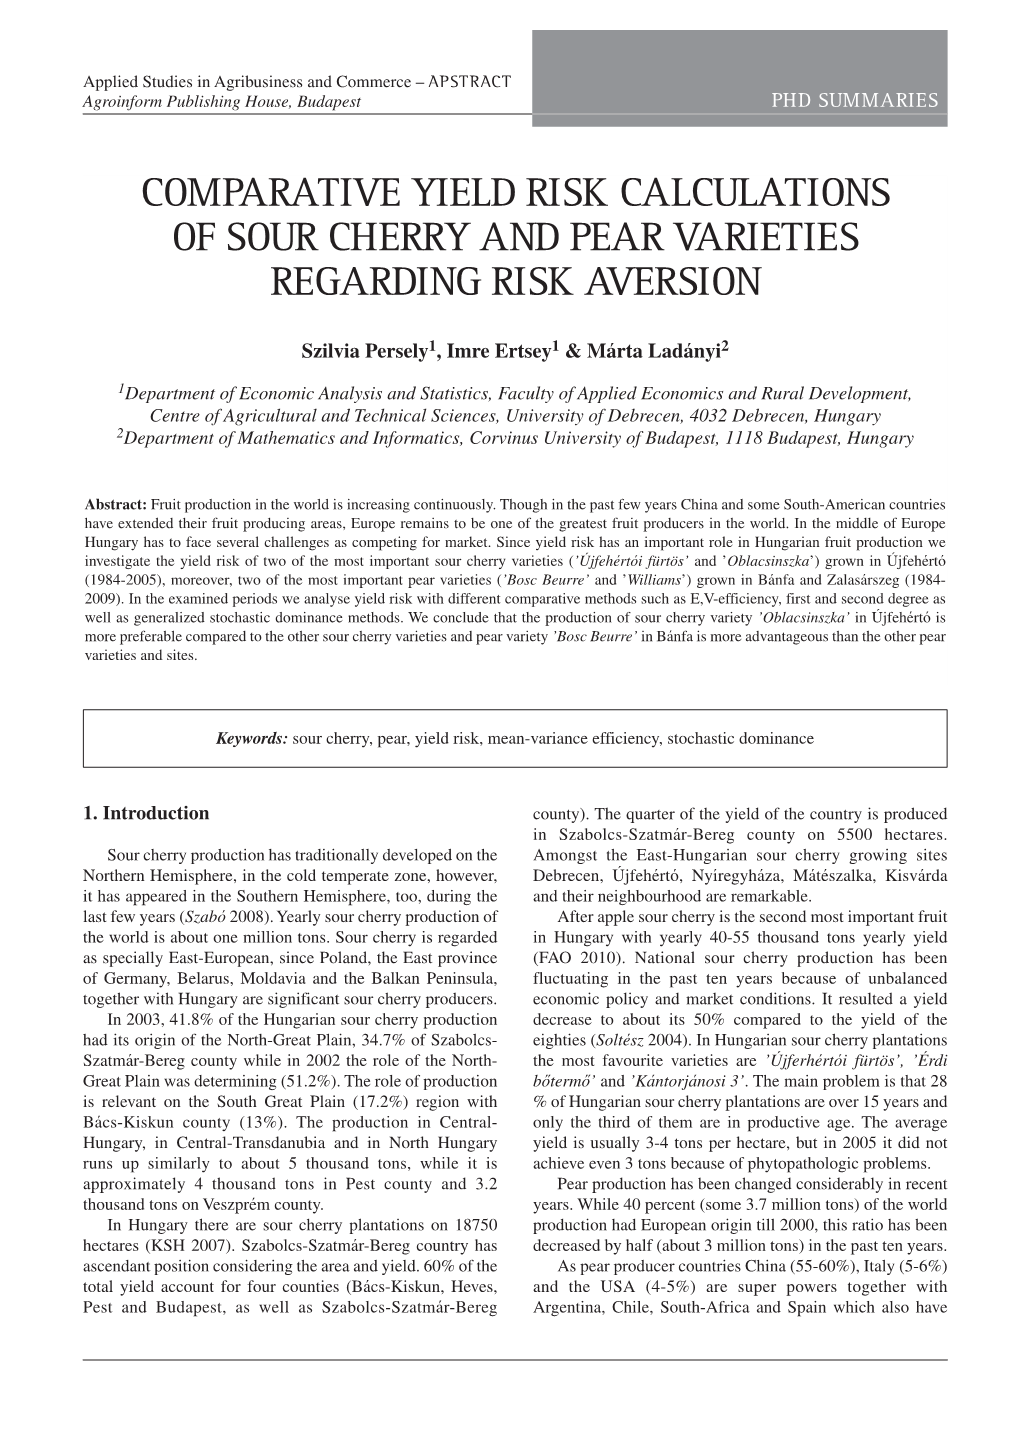 Comparative Yield Risk Calculations of Sour Cherry and Pear Varieties Regarding Risk Aversion